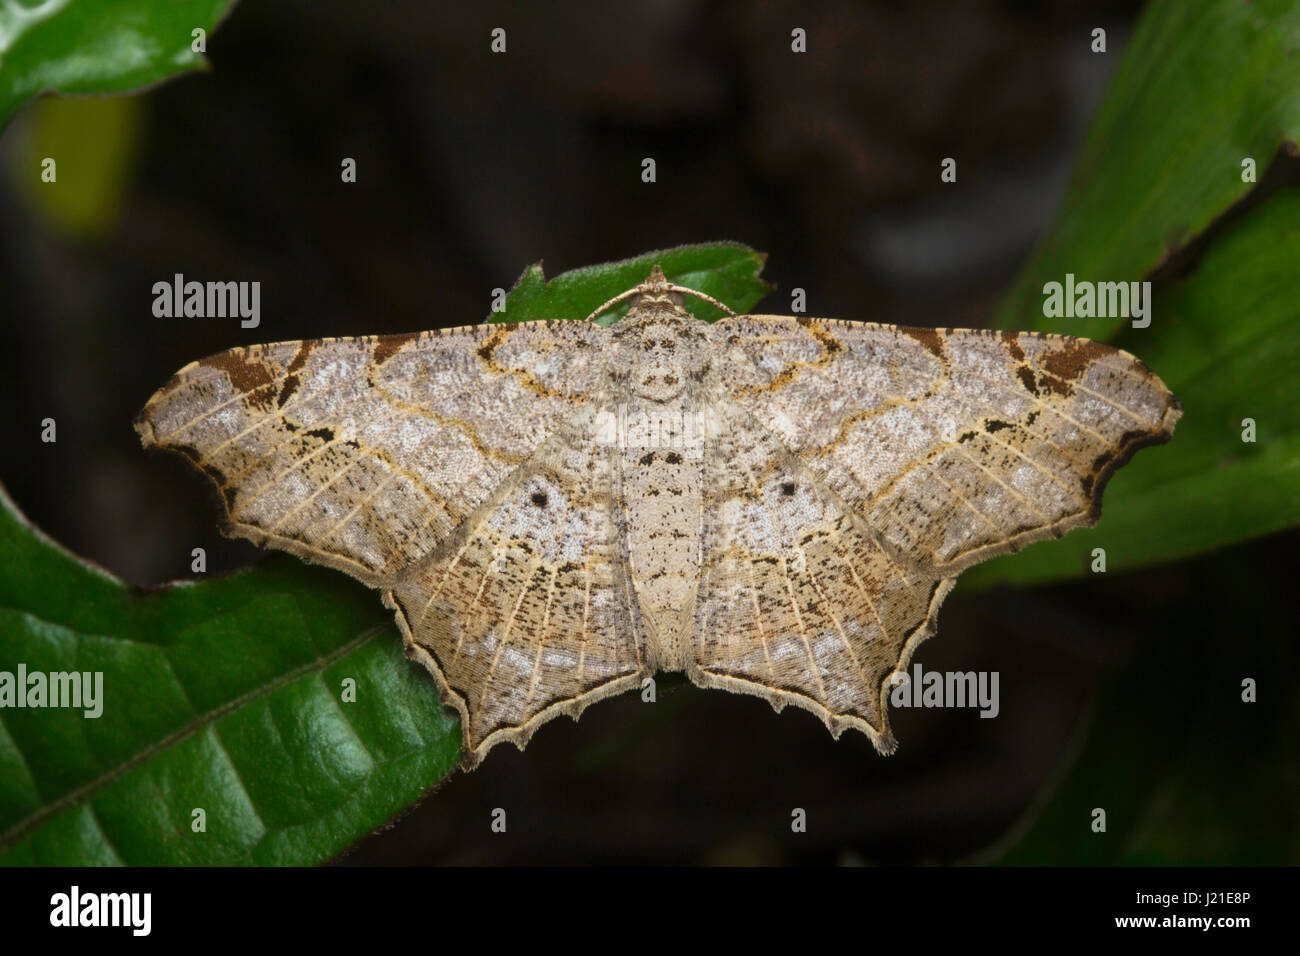 Moth , Aarey Milk Colony , INDIA. The moths are among the most widely studied lepidopterans in the world. Ranging from as small as a few millimeters t Stock Photo